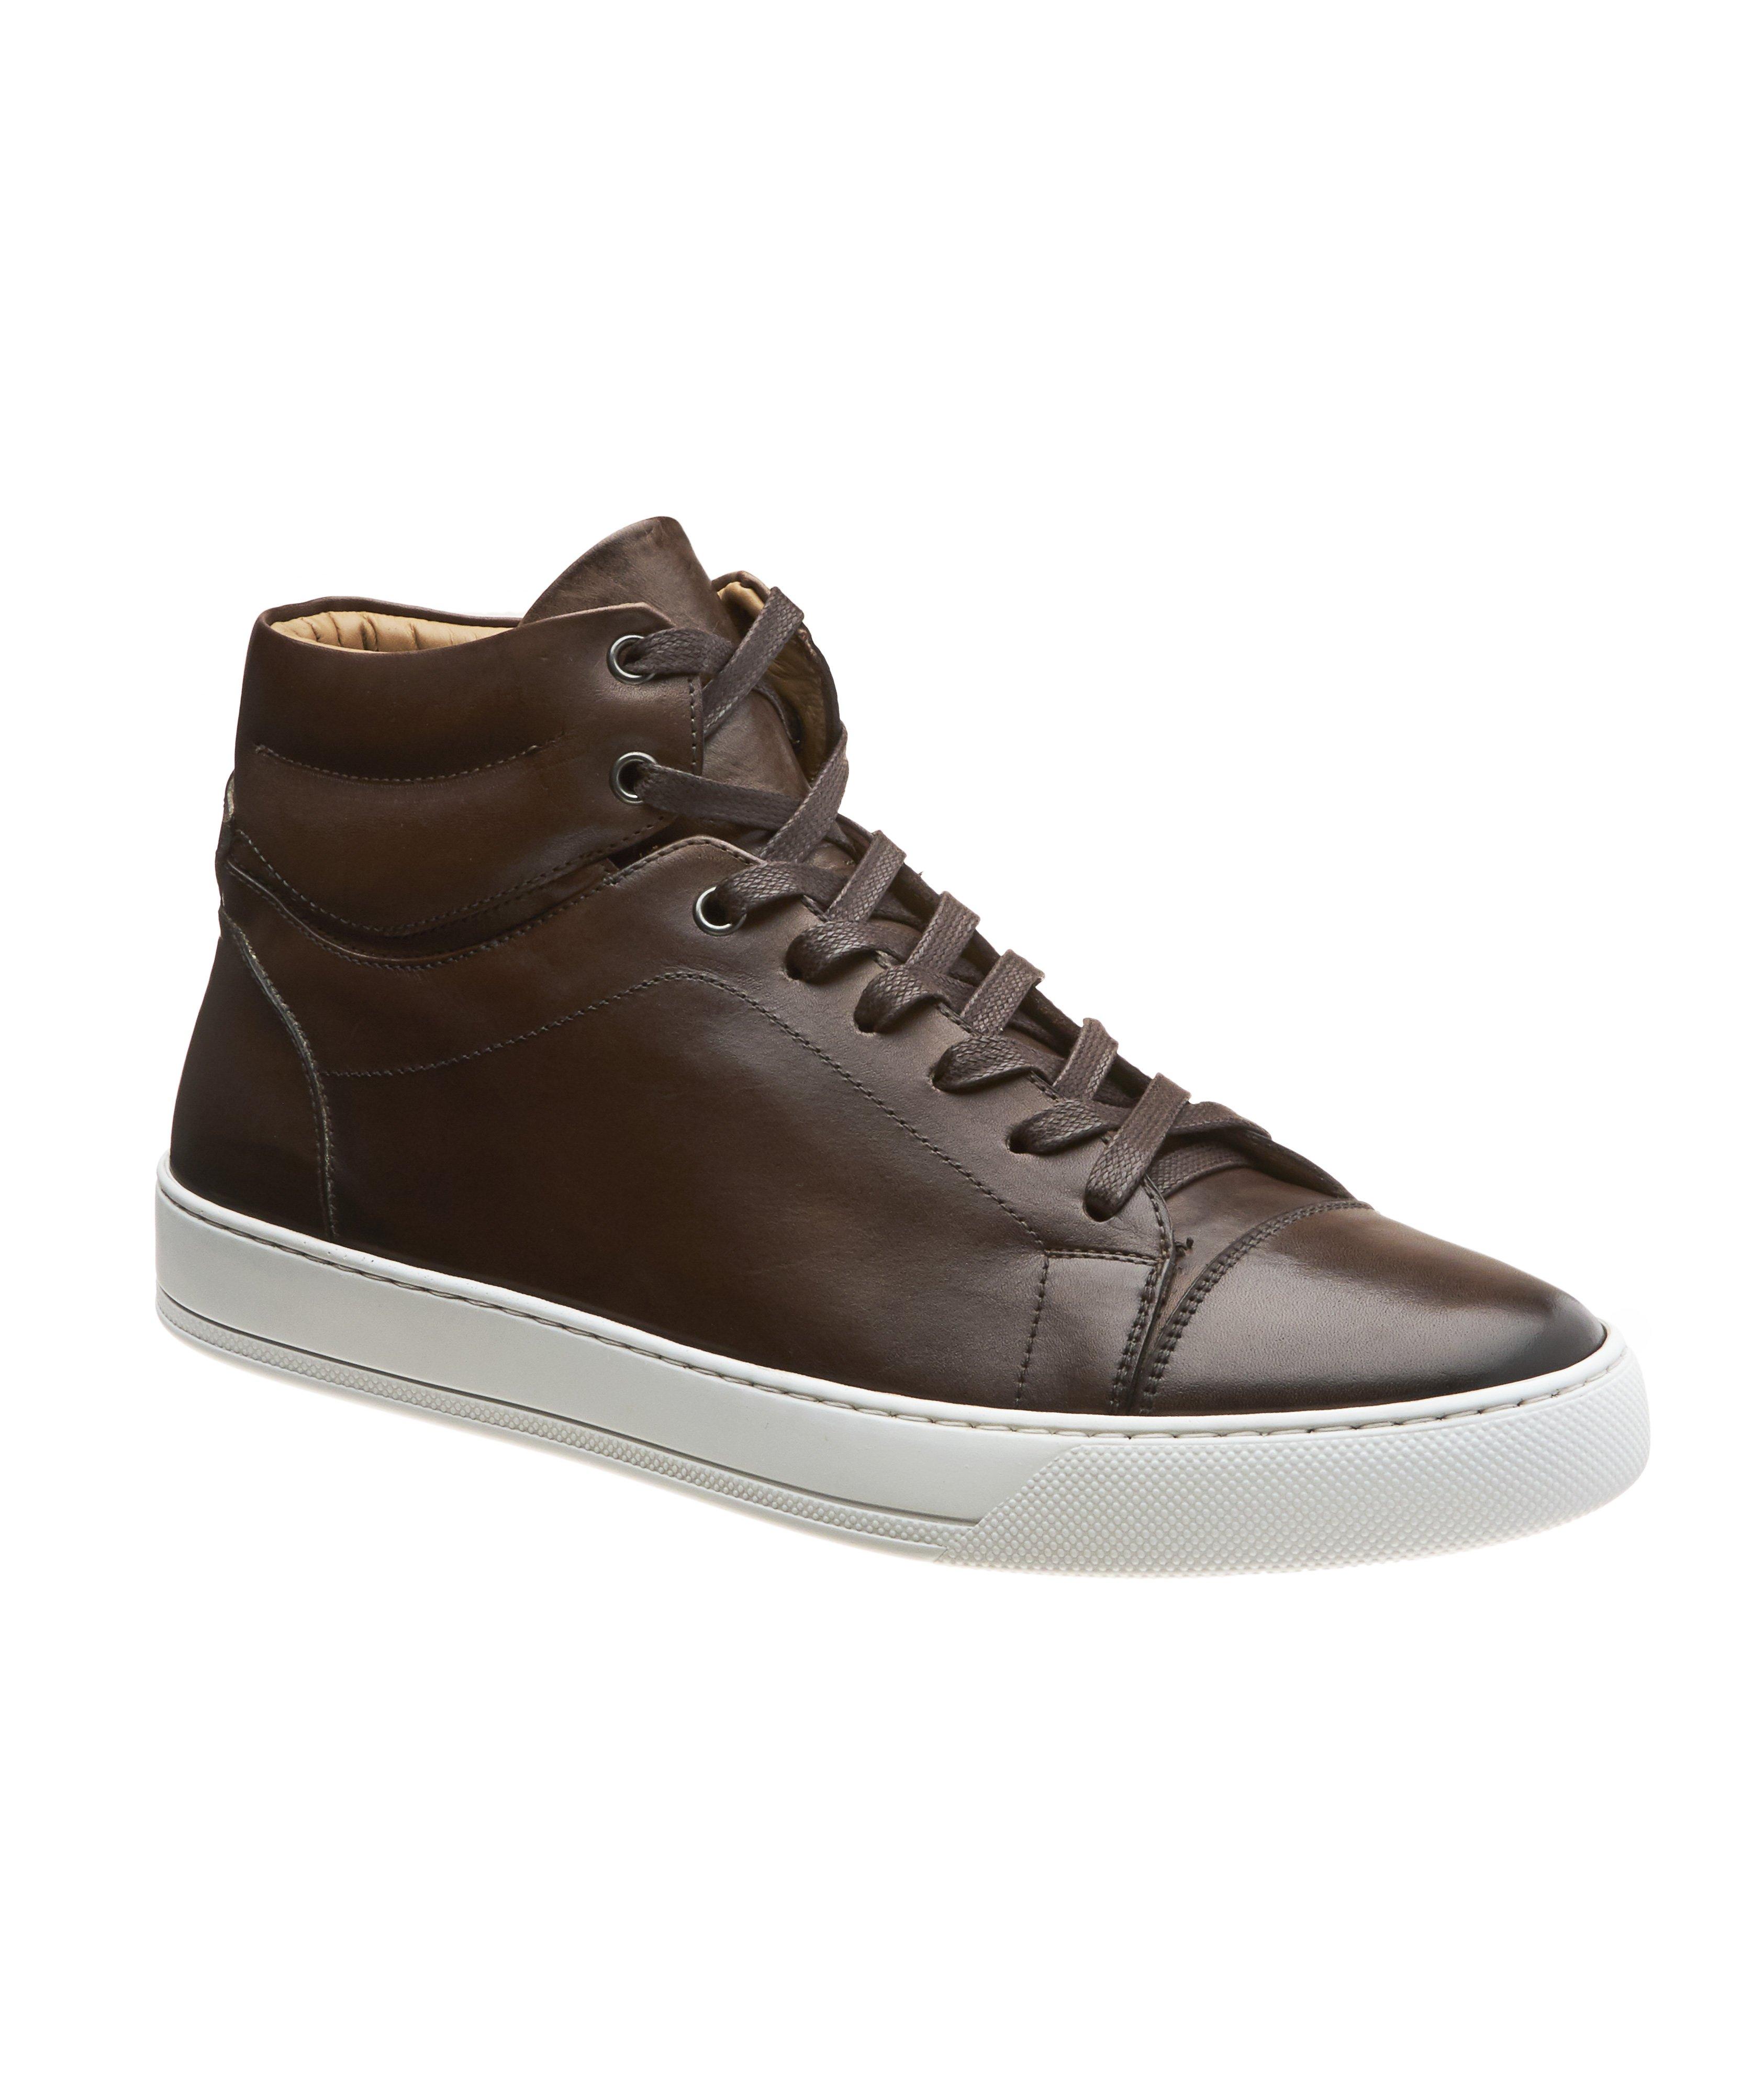 High-Top Leather Sneakers image 0